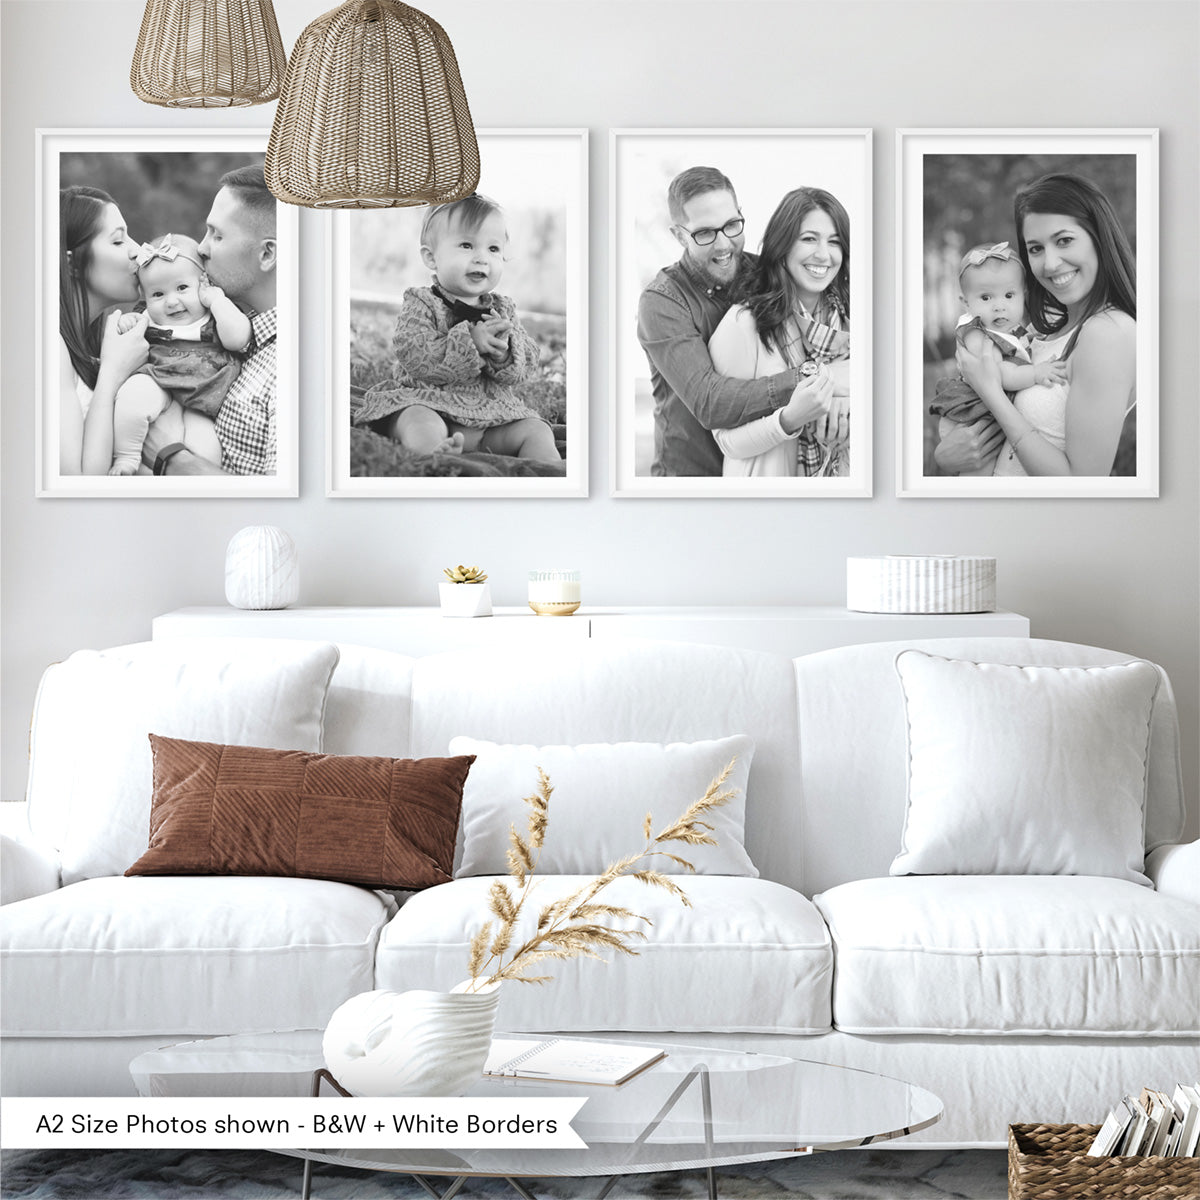 Custom Gallery Wall Prints - Set of 4 | Photo Prints, Posters, Stretched Canvas, or Framed Photo Prints.